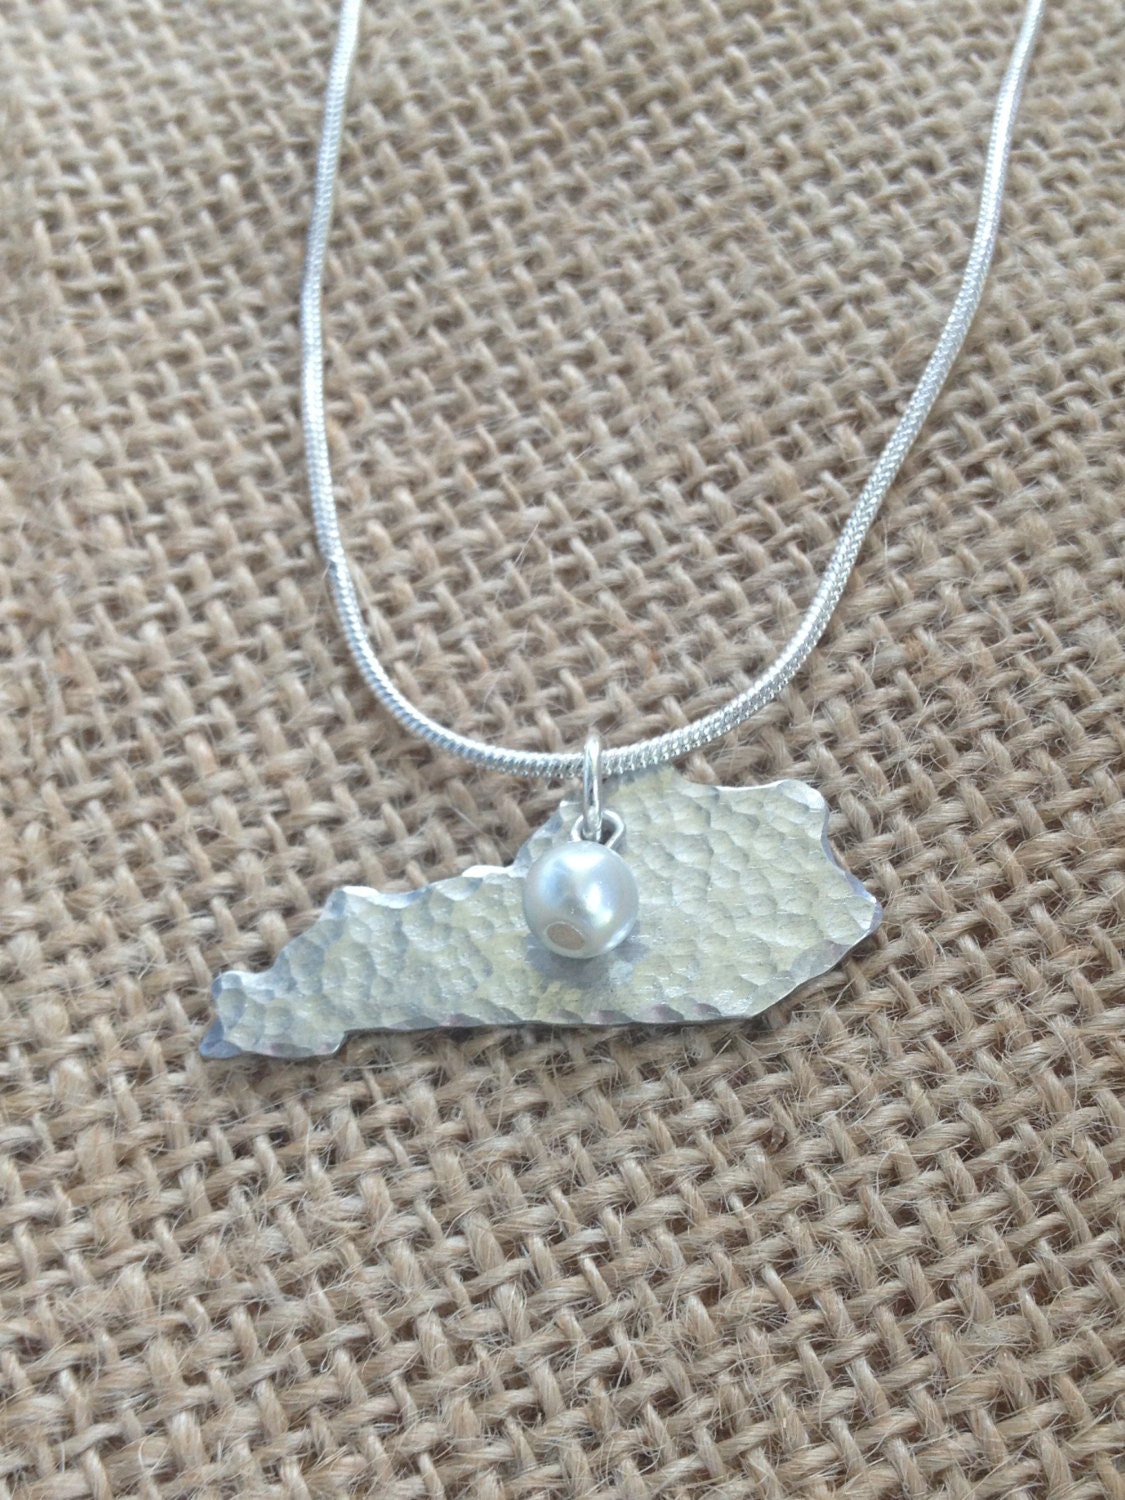 Hammered Aluminum State of Kentucky Necklace With Pearl, State of Kentucky Necklace, Kentucky Jewelry, Aluminum Hammered State of KY Jewelry